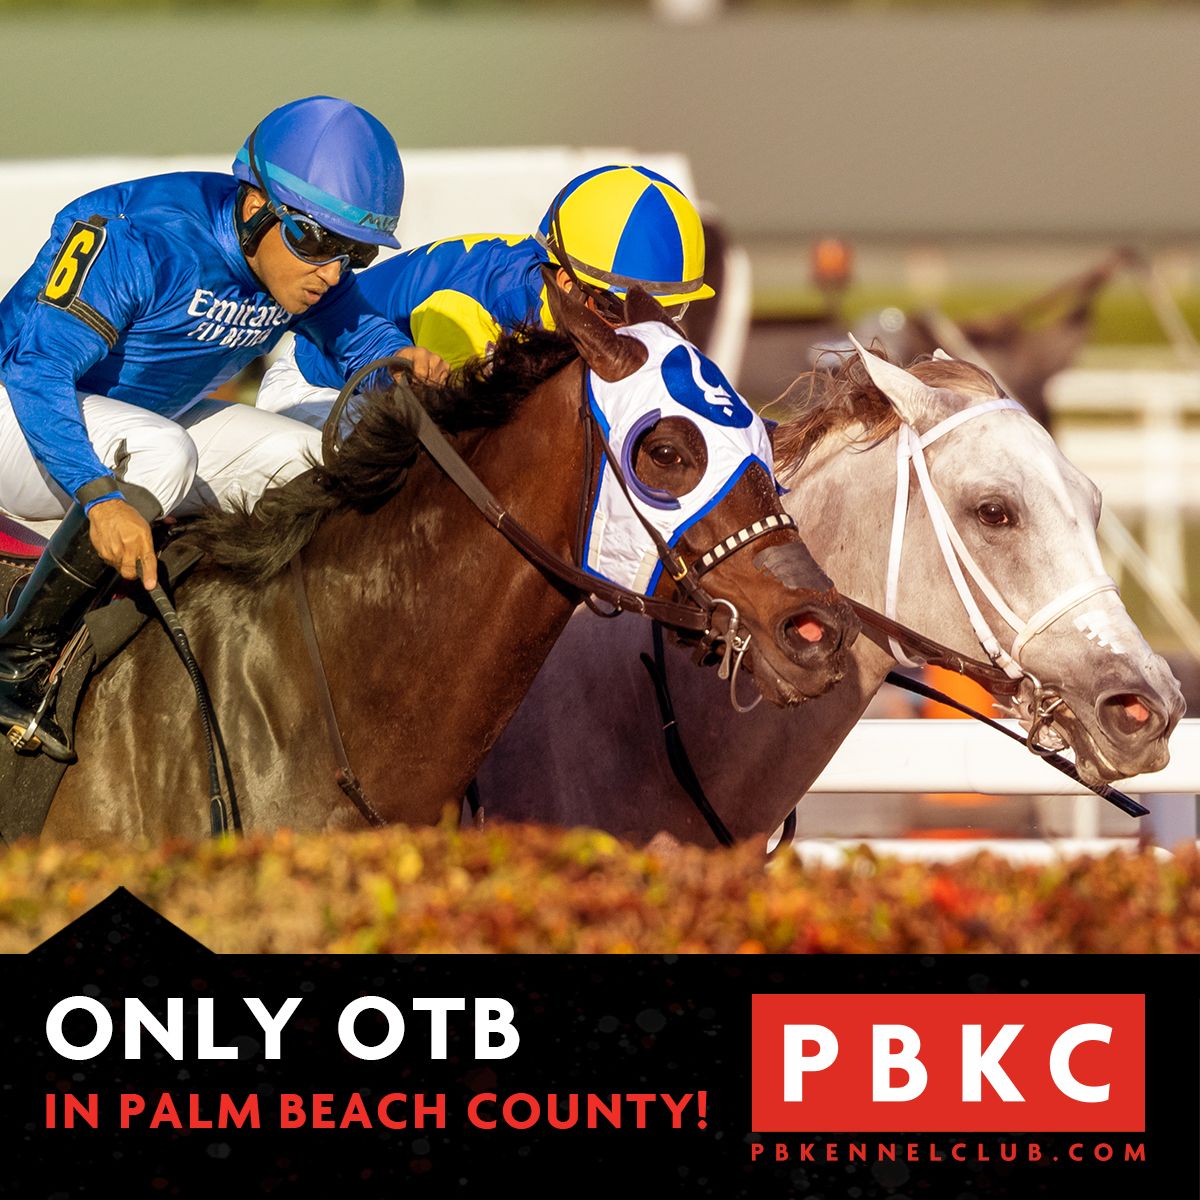 PBKC is the only OTB in Palm Beach County! Come play all the biggest races from all the best tracks! The Paddock Restaurant is the best place to play! #otb #horseracing #simulcast #bet #kentuckyderby #westpalmbeach